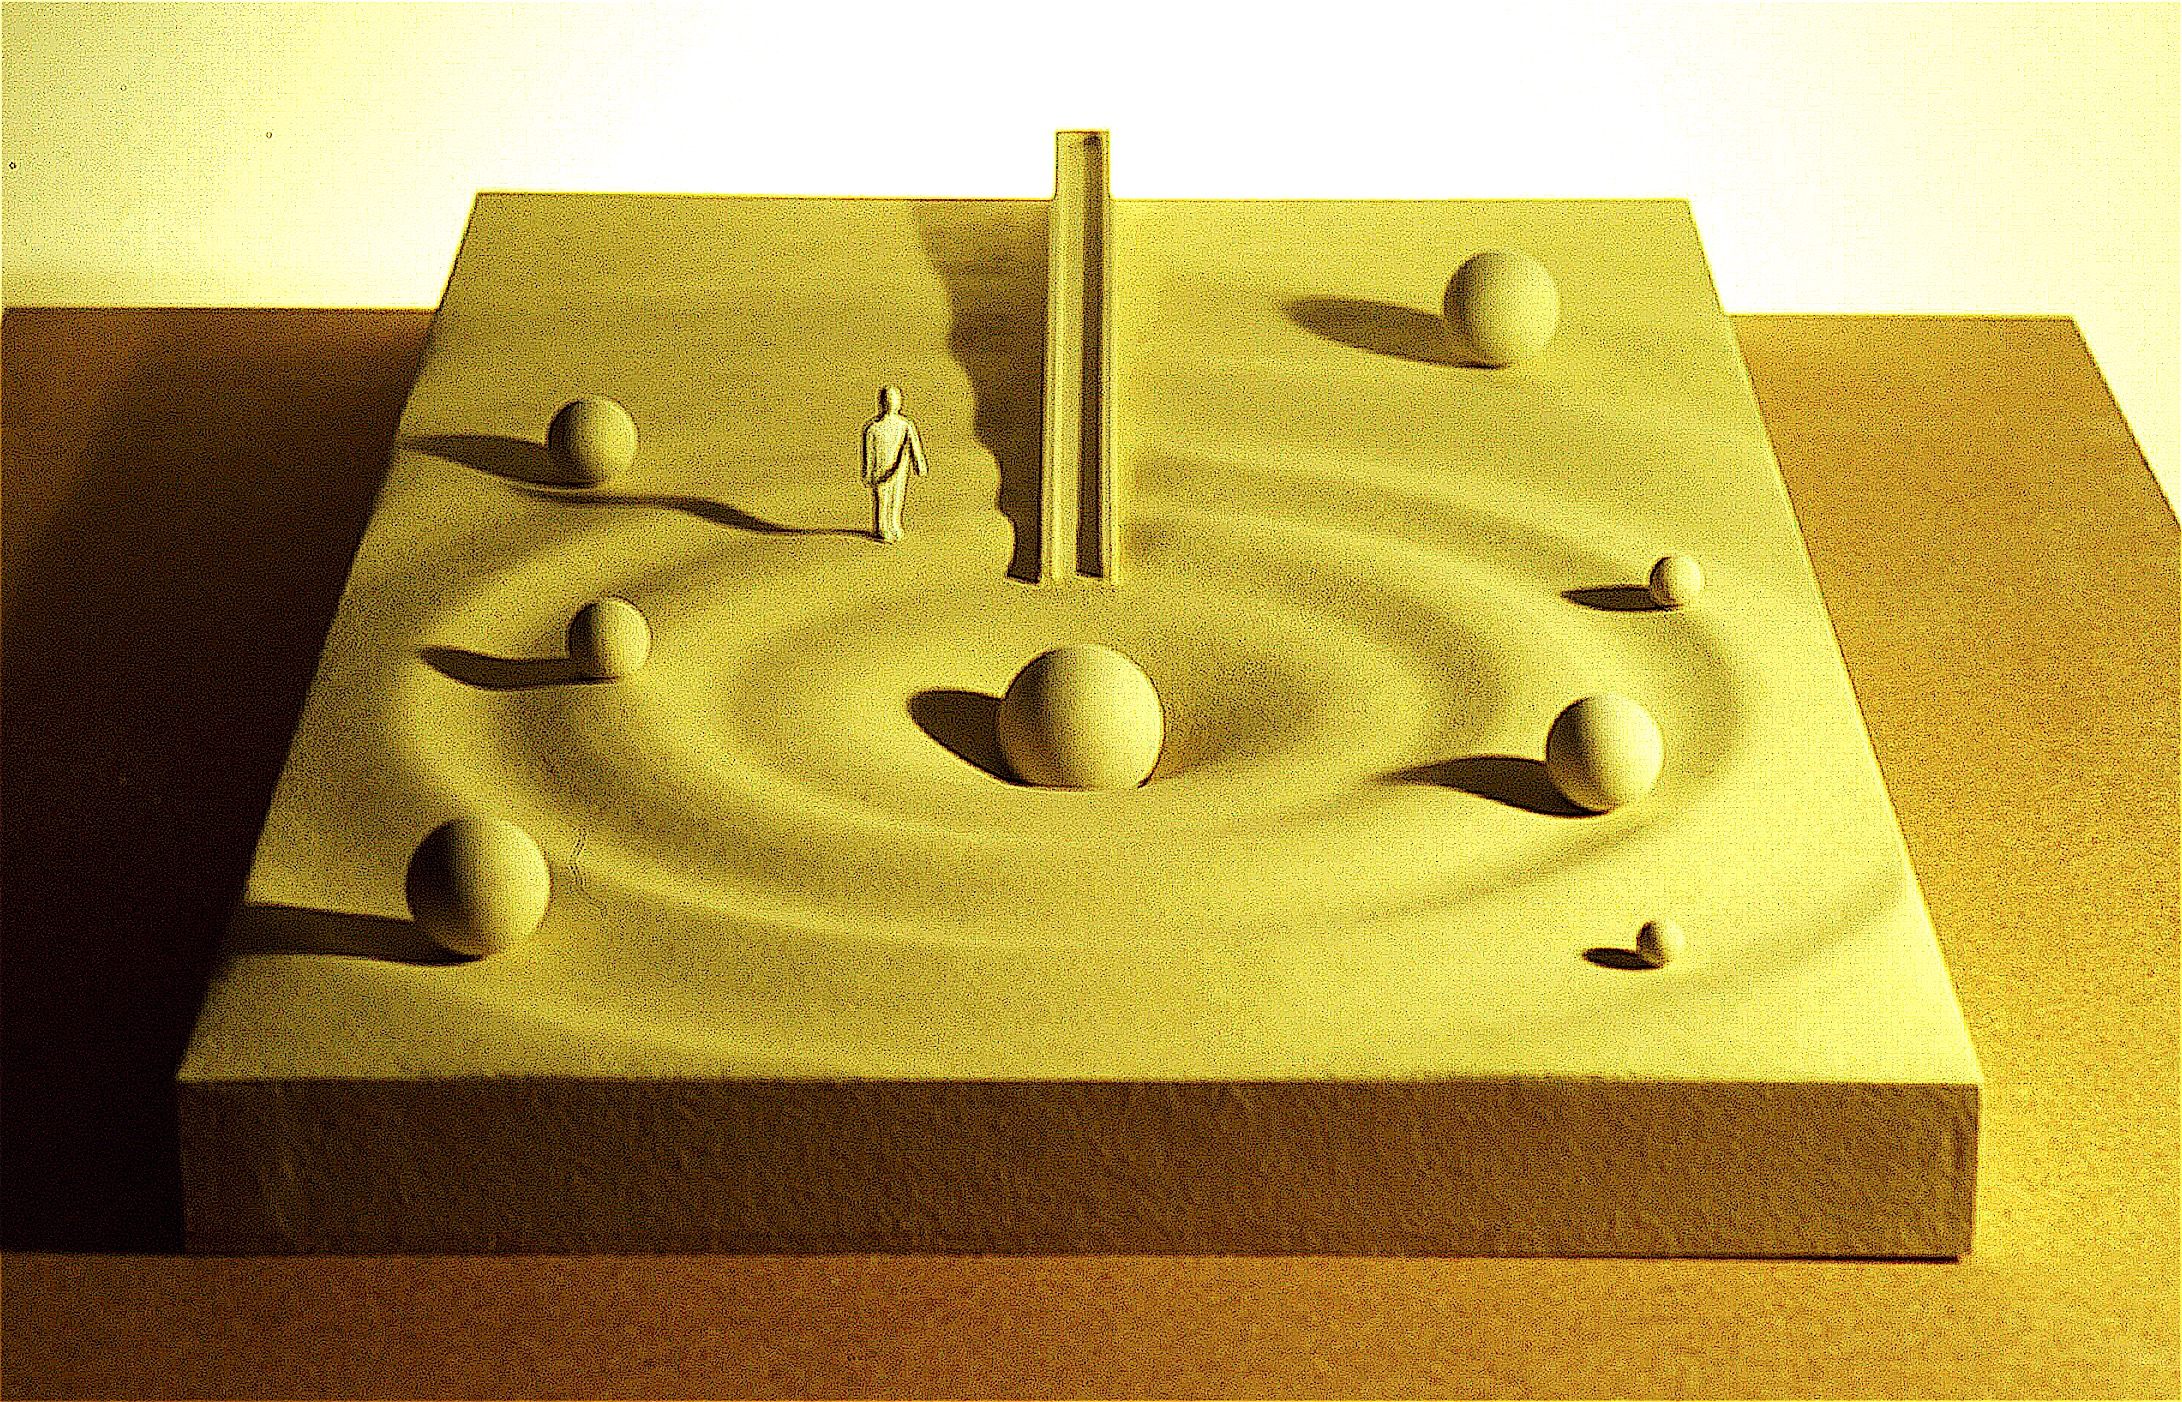 Thomas Coffin - Ripple Effect Fountain, monumental sculpture and earthworks model